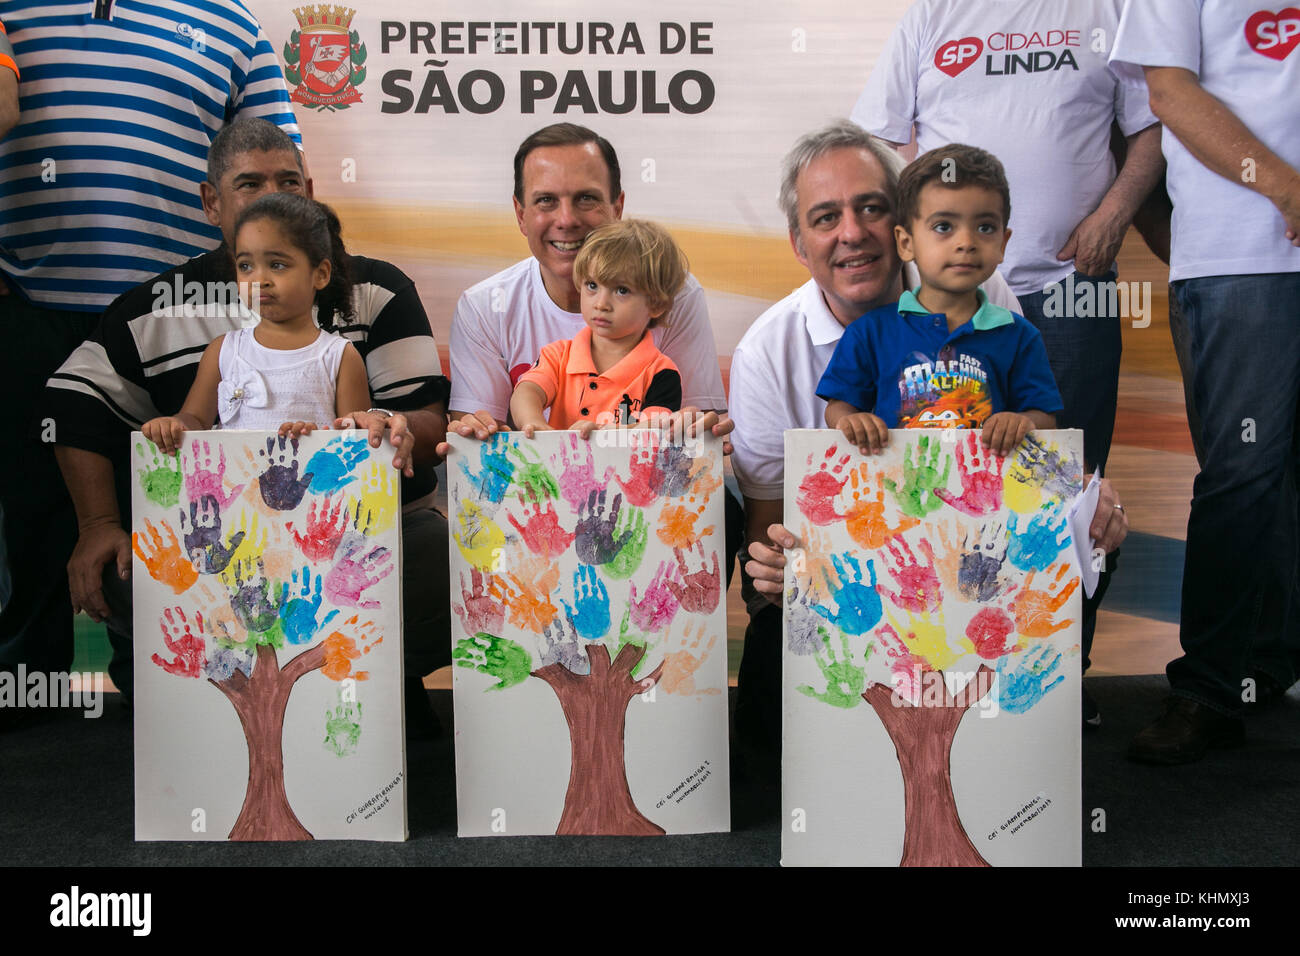 SÃO PAULO, SP - 18.11.2017: DORIA INAUGURA CEI EM GUARAPIRANGA SP - Mayor João Doria (PSDB) inaugurated a new Guarapiranga I Early Childhood Education Center (CEI) in the Guarapiranga region, south of the city of São Paulo, this Saturday (18). The new CEI has 9 classrooms and a park, as well as a toy library, equipped kitchen and dining room, where 5 daily meals will be served coffee and morning snack, lunch, afternoon coffee and dinner. The total investment was 9.5 million, the unit has 1010.55 square meters being 490.20 meters built. (Photo: Tom Vieira Freitas/Fotoarena) Stock Photo